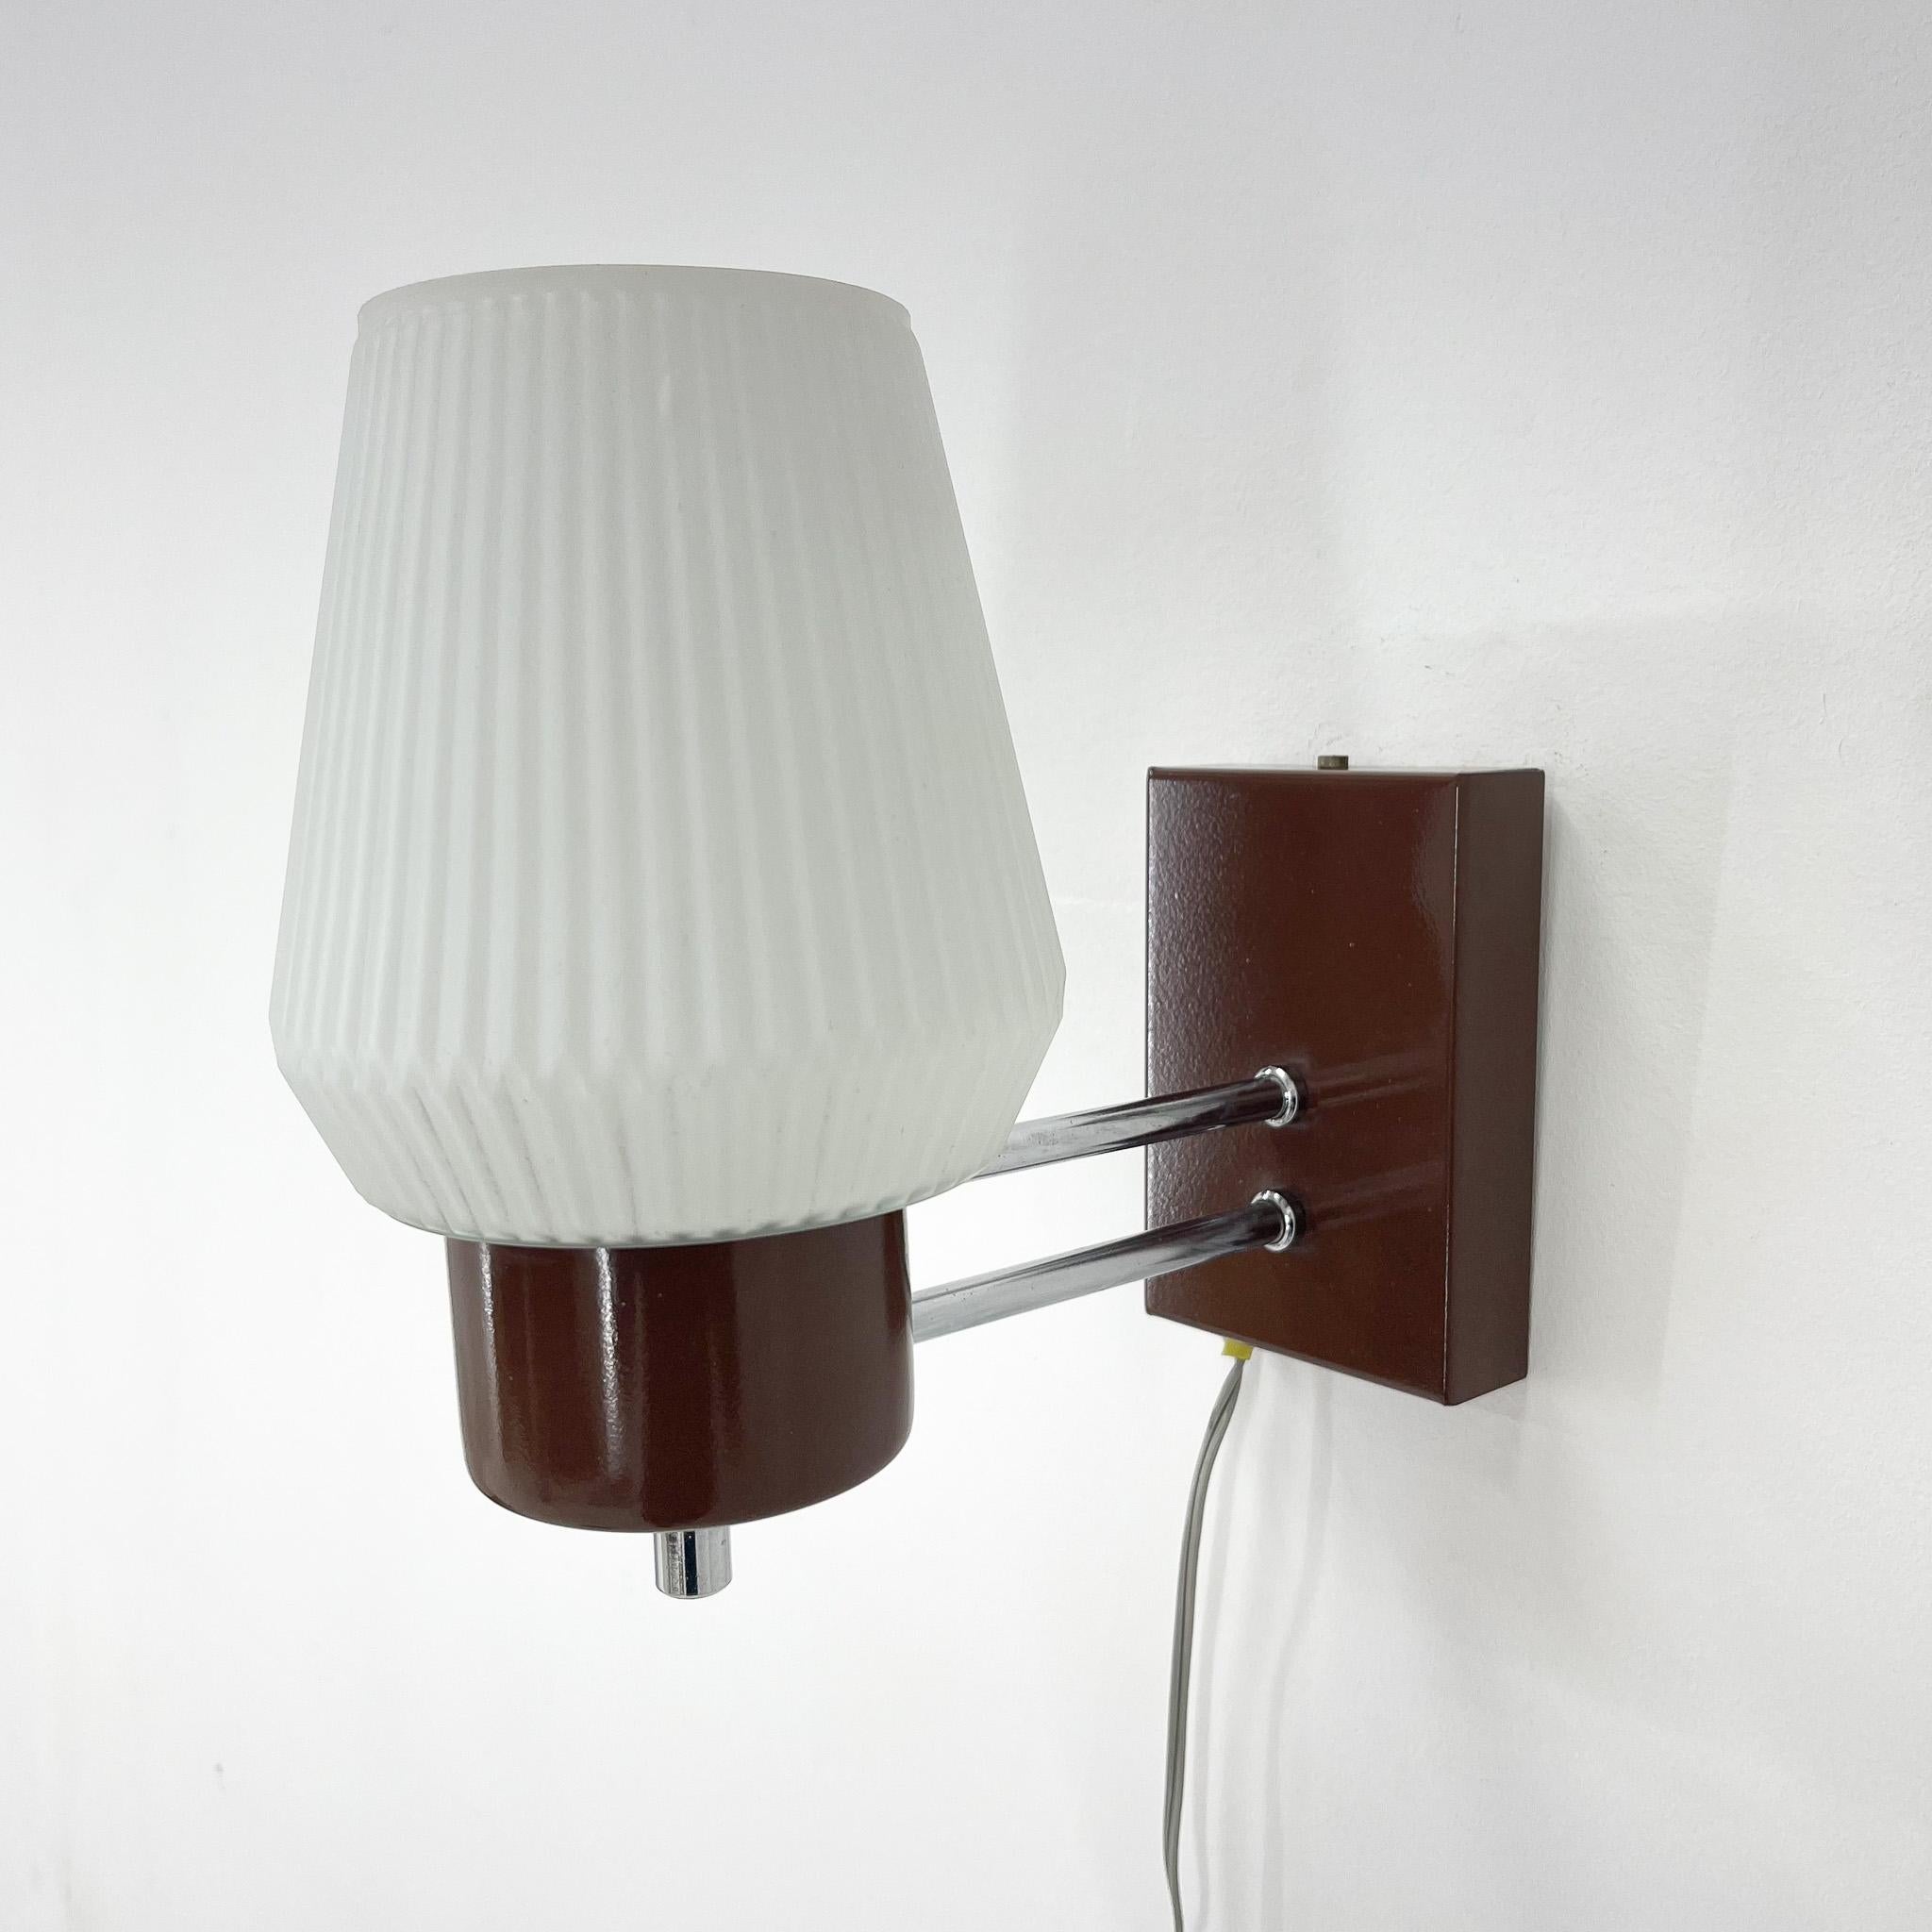 Vintage wall lamp from former Czechoslovakia made of chrome, metal and milk glass. Produced in former Czechoslovakia. Very good vintage condition.